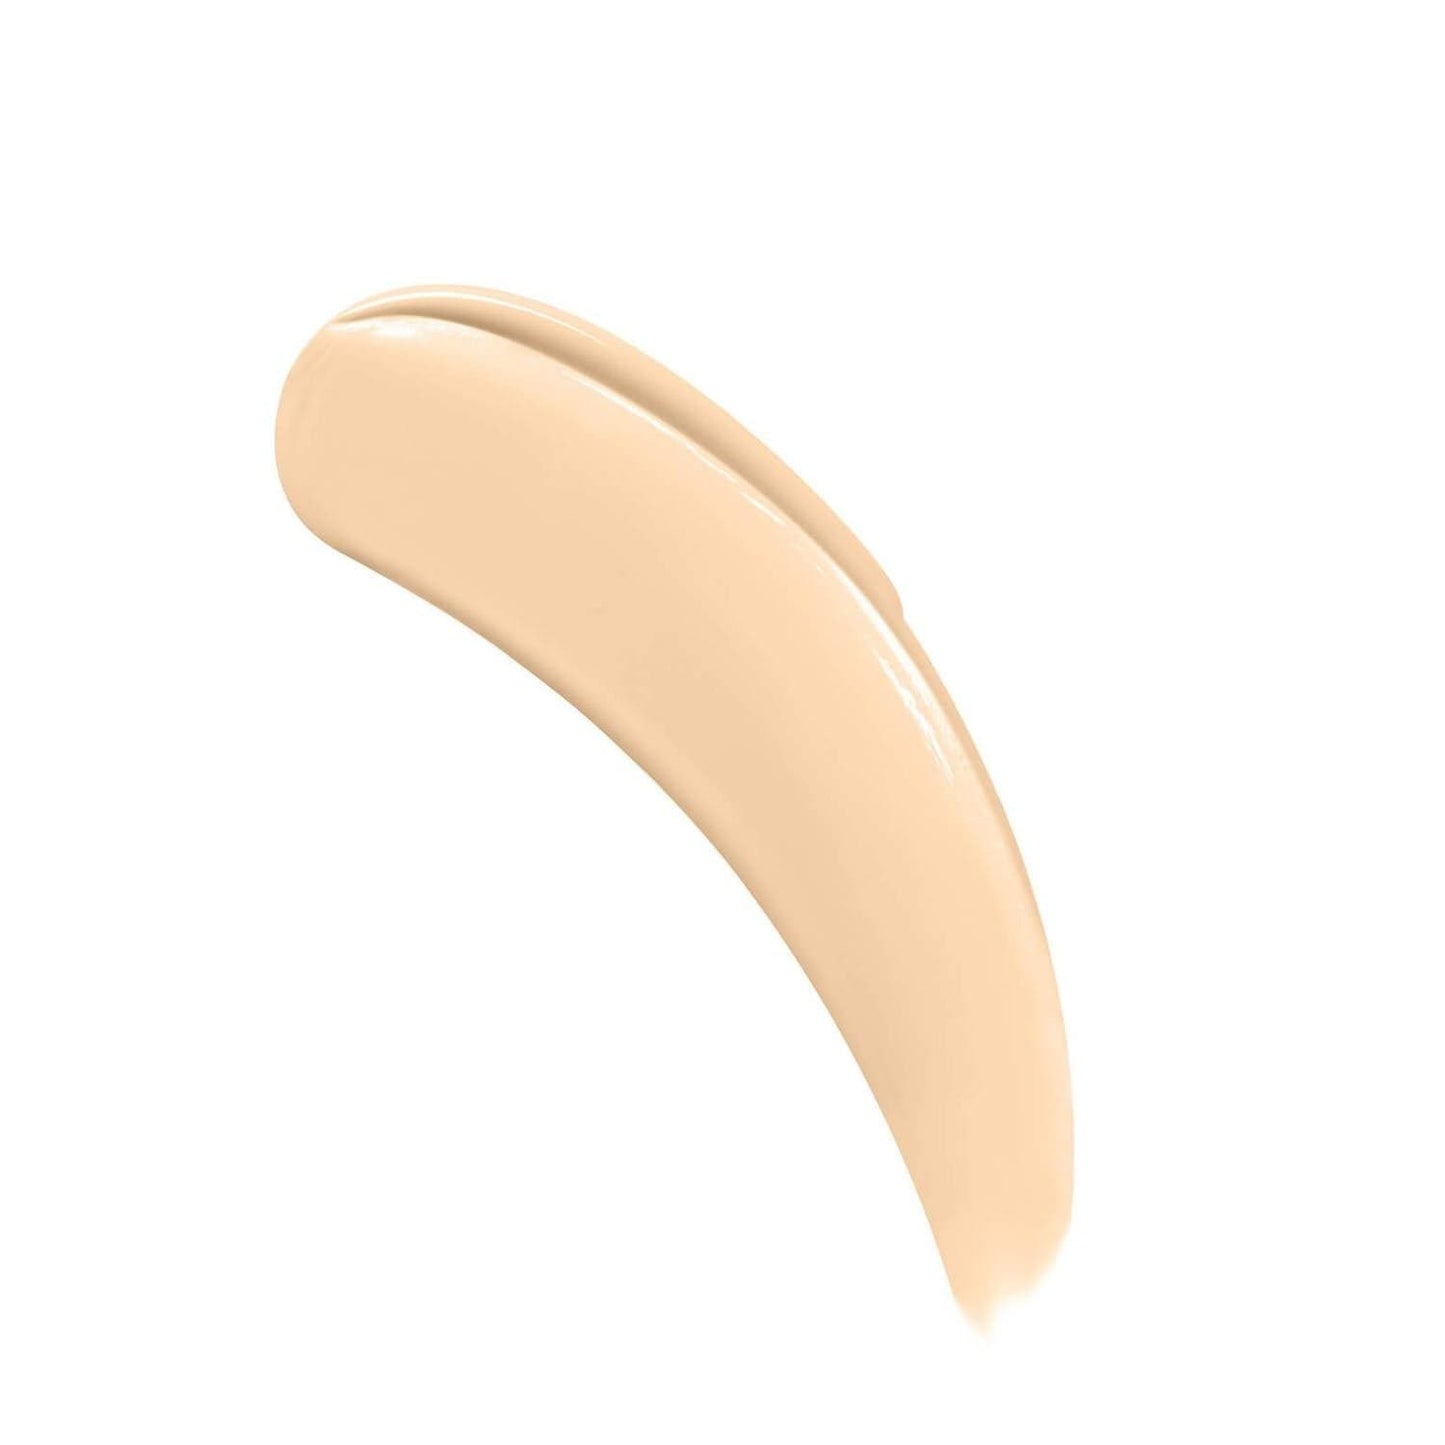 IT COSMETICS Beauty IT Cosmetics Your Skin But Better Foundation and Skincare 30ml - 22.5 Light Warm